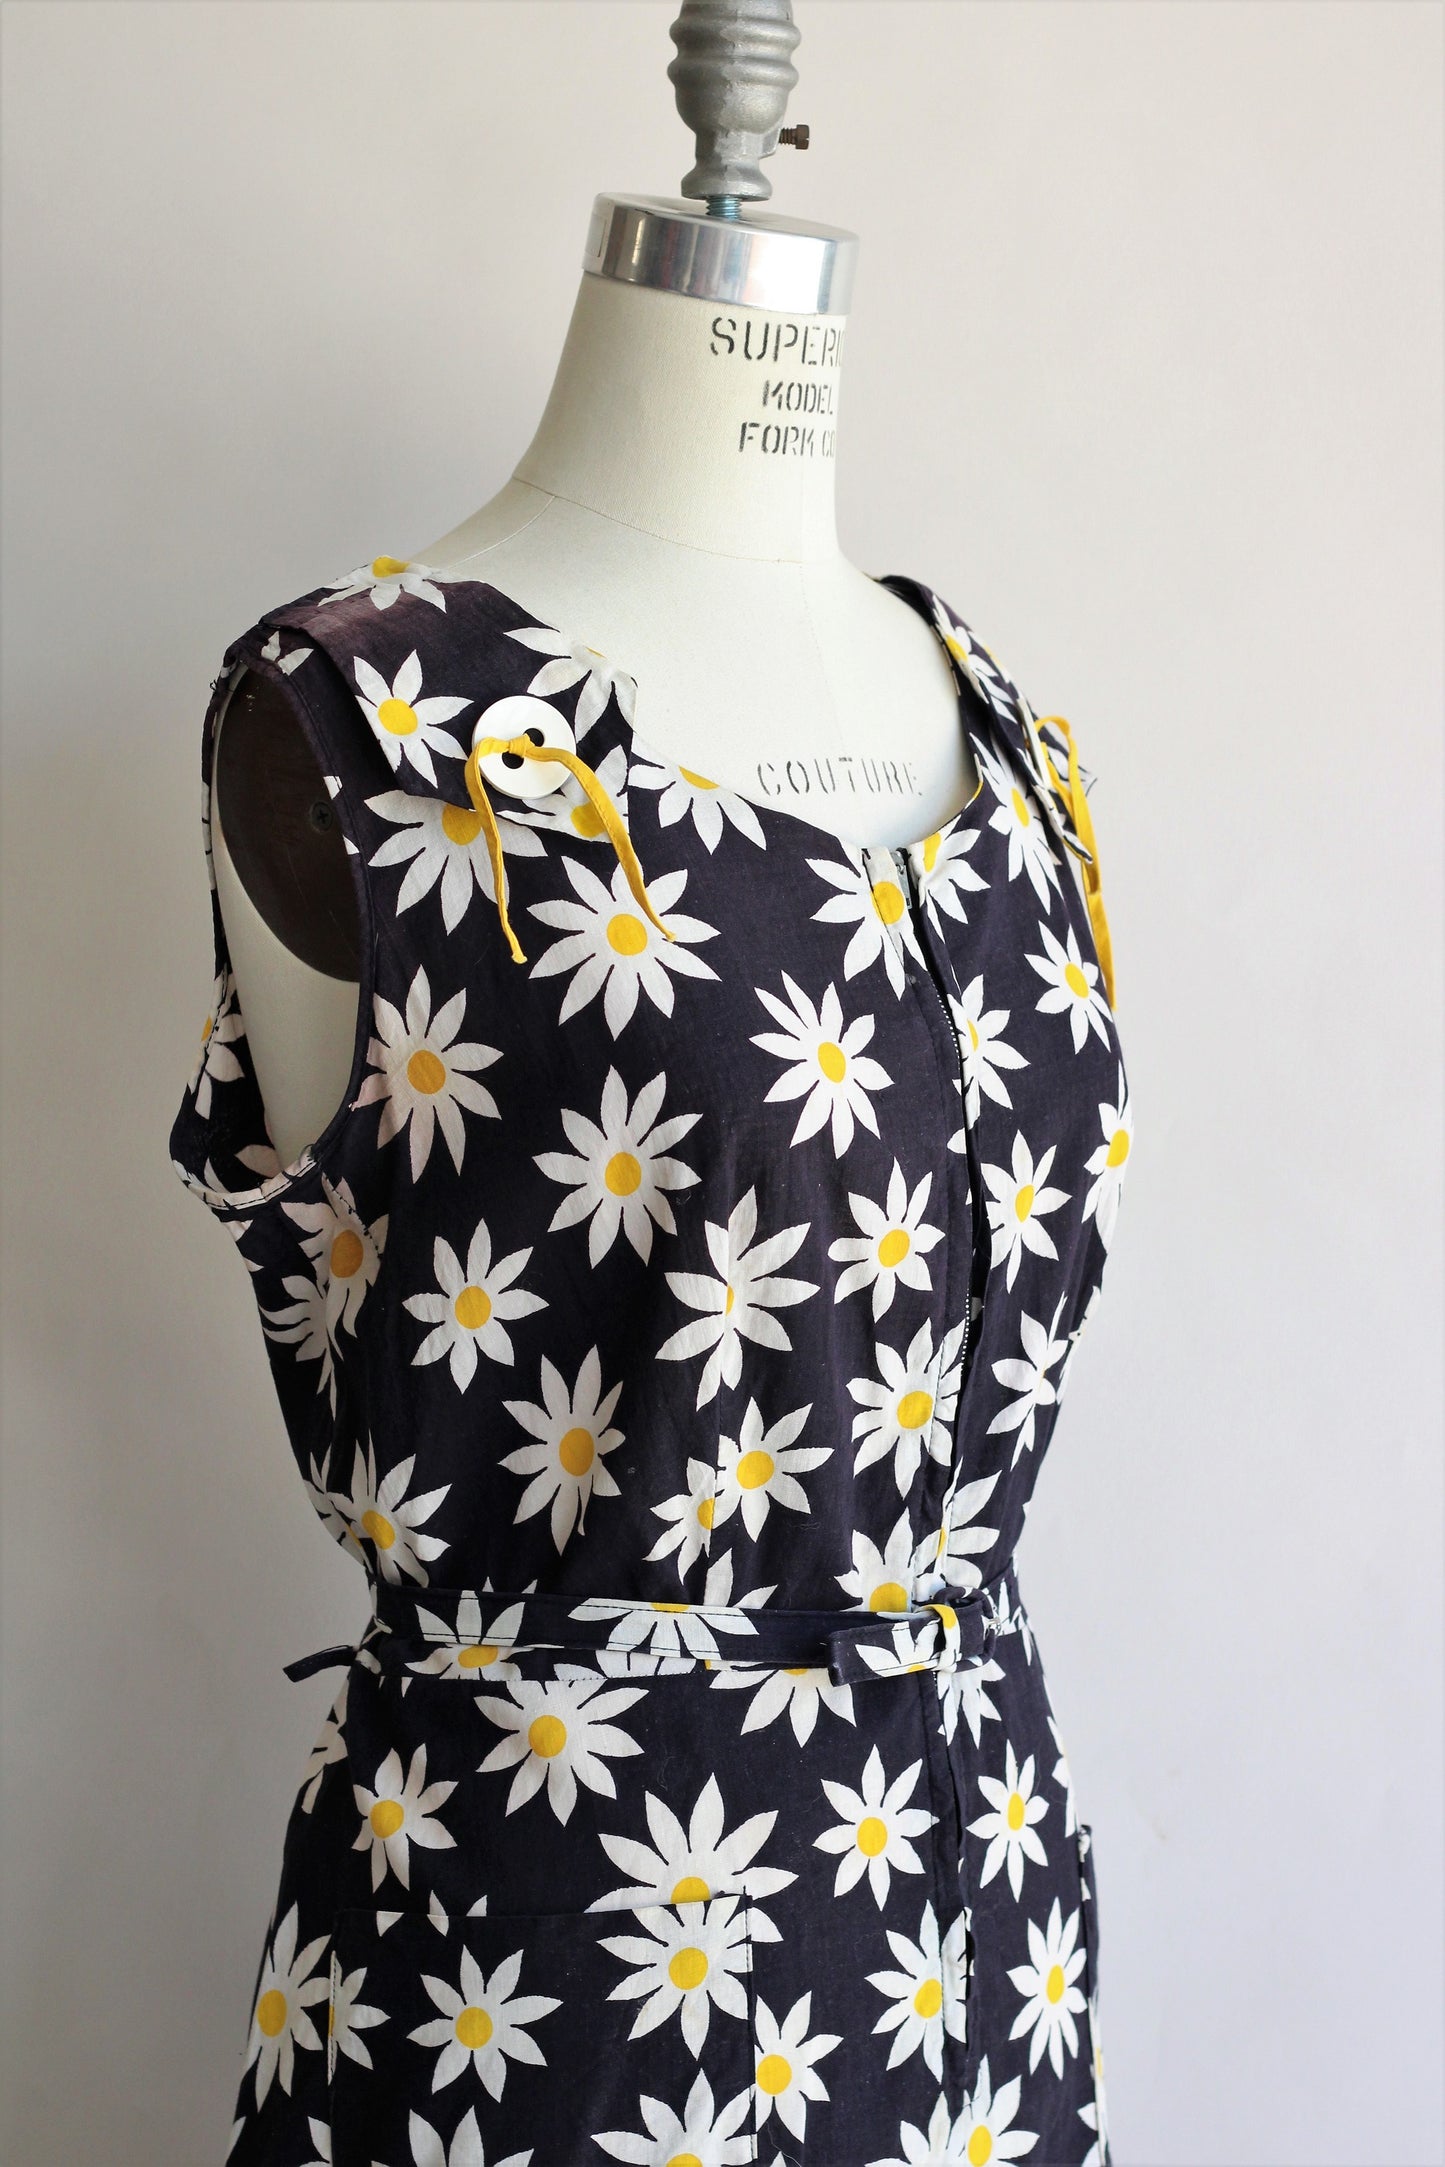 Vintage 1960s Plus Size Daisy Print Sundress with Belt and Pockets